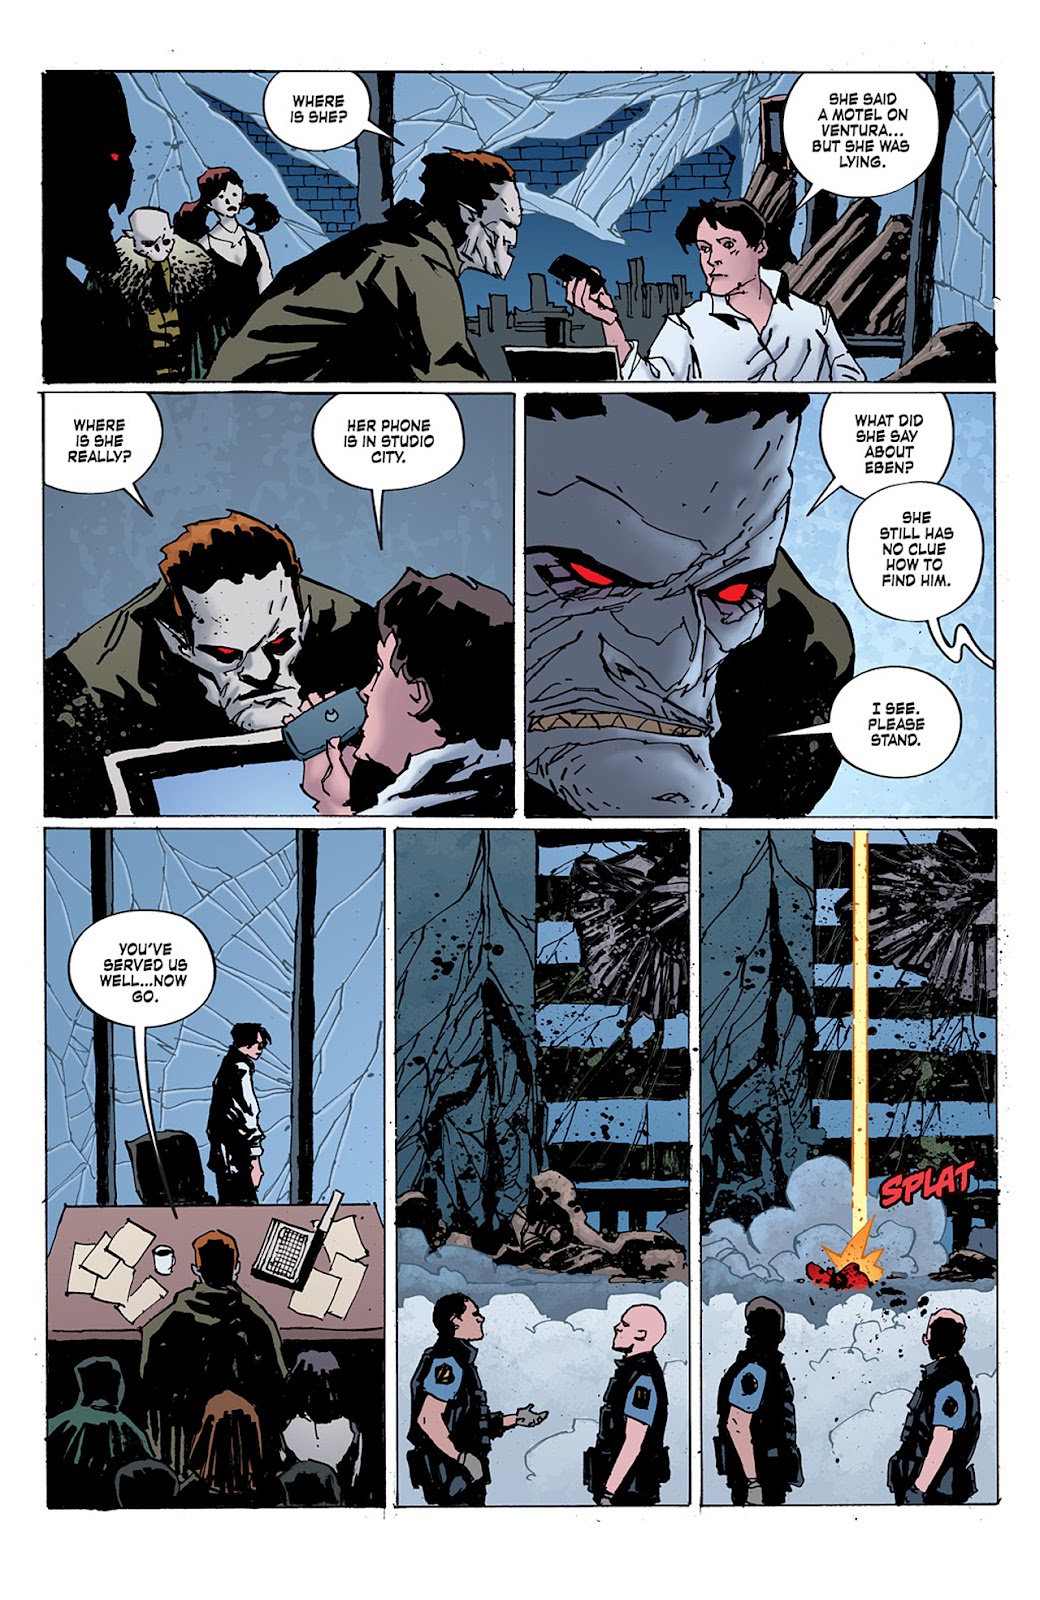 Criminal Macabre: Final Night - The 30 Days of Night Crossover issue 2 - Page 15